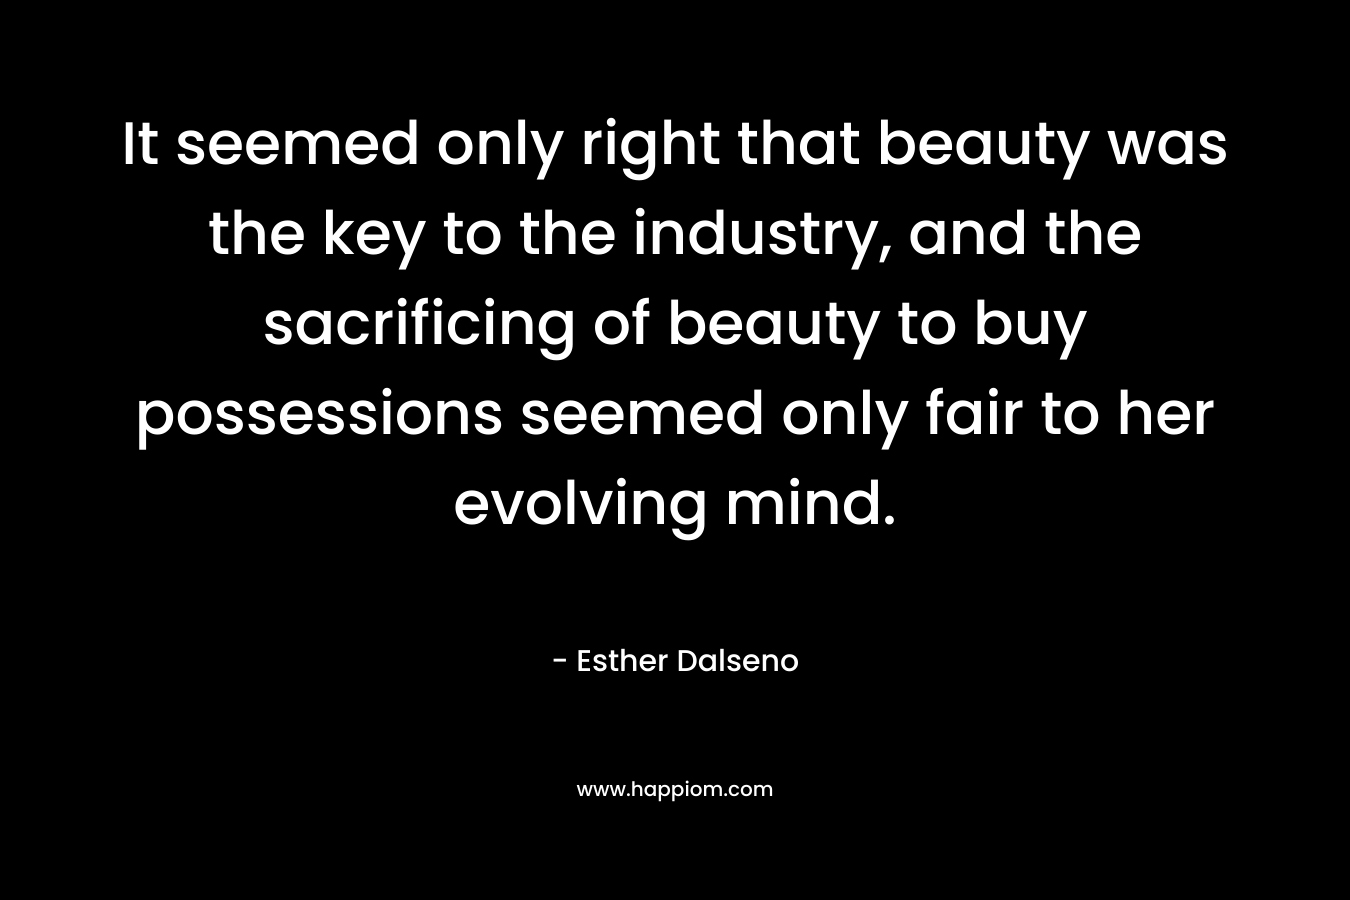 It seemed only right that beauty was the key to the industry, and the sacrificing of beauty to buy possessions seemed only fair to her evolving mind.